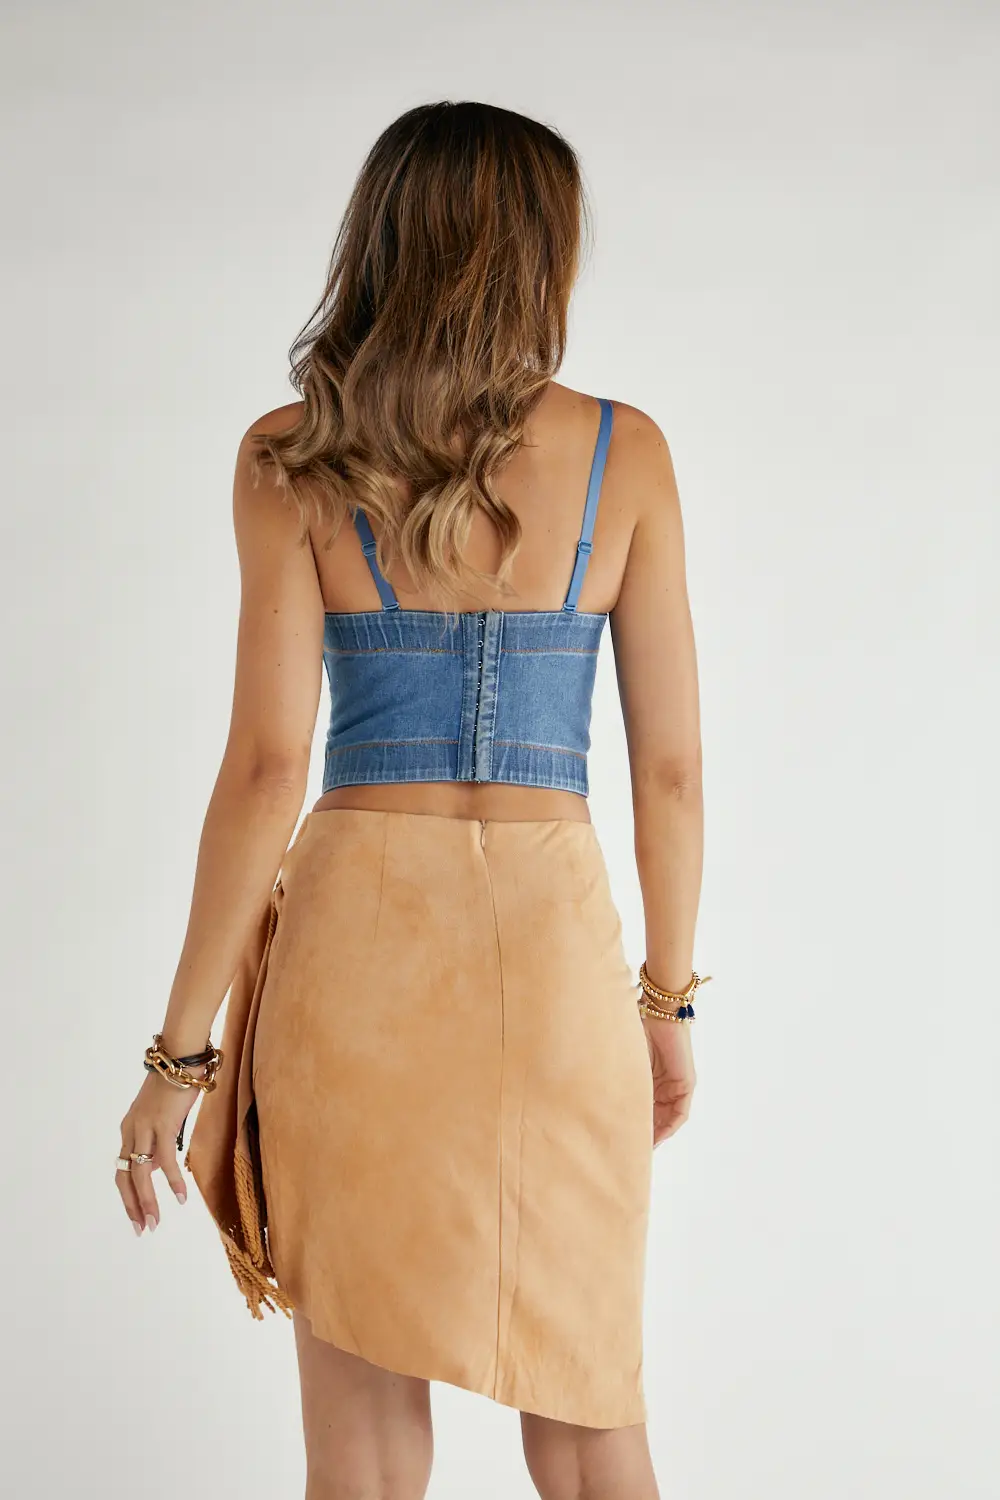 All About Denim Bustier Top